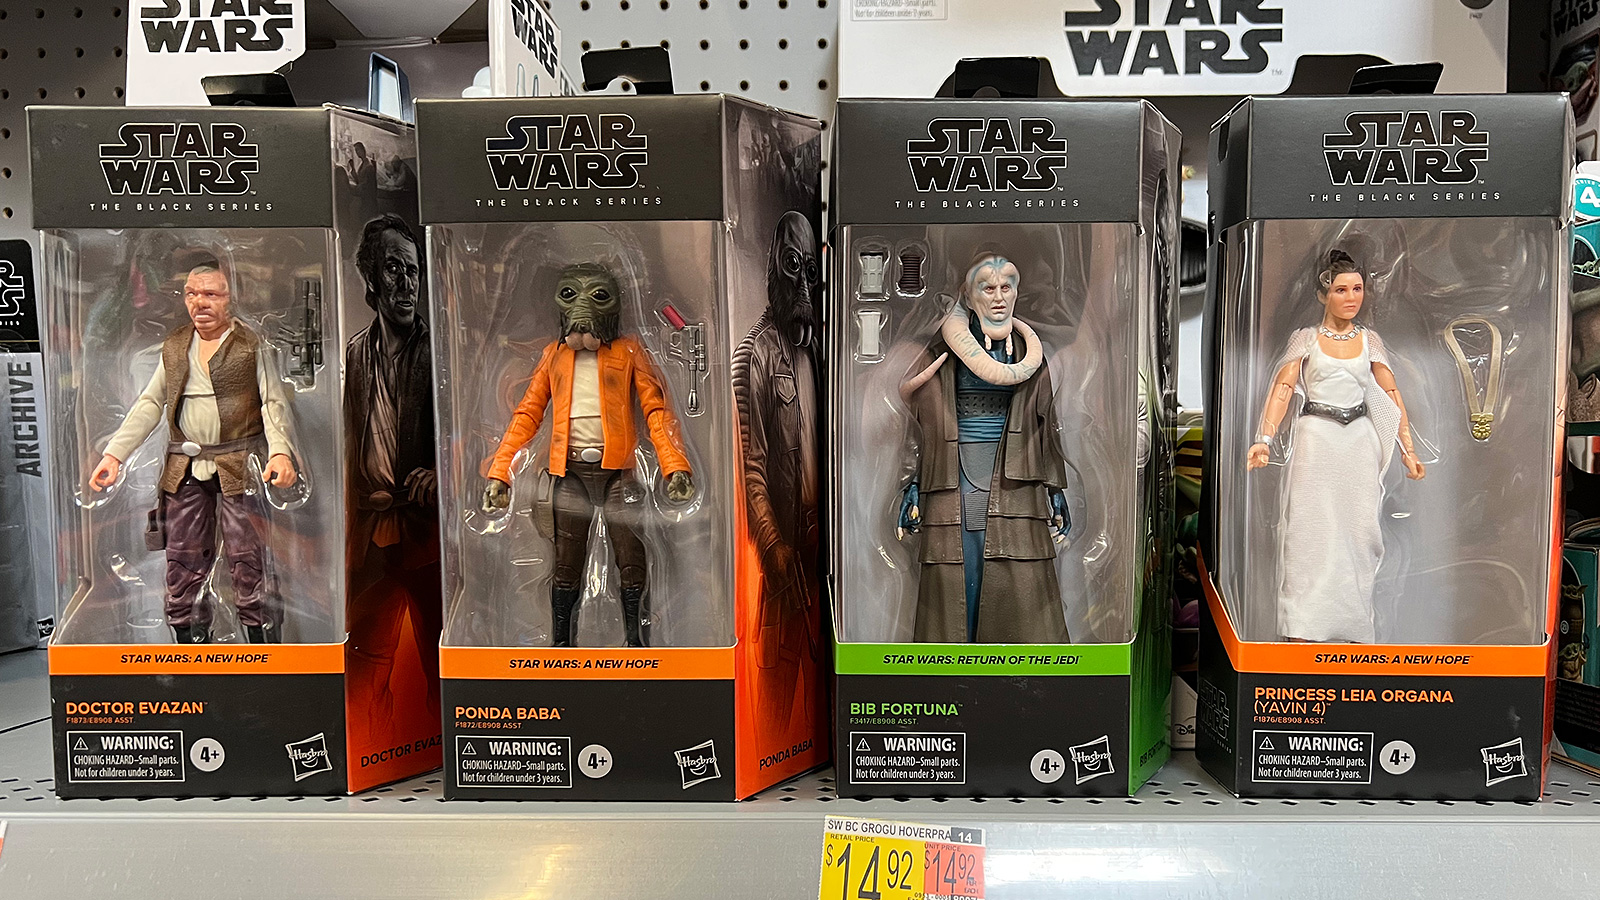 Hitting Local Walmart Stores - The Black Series 6-Inch Wave 6 (Fennec Shand Wave)